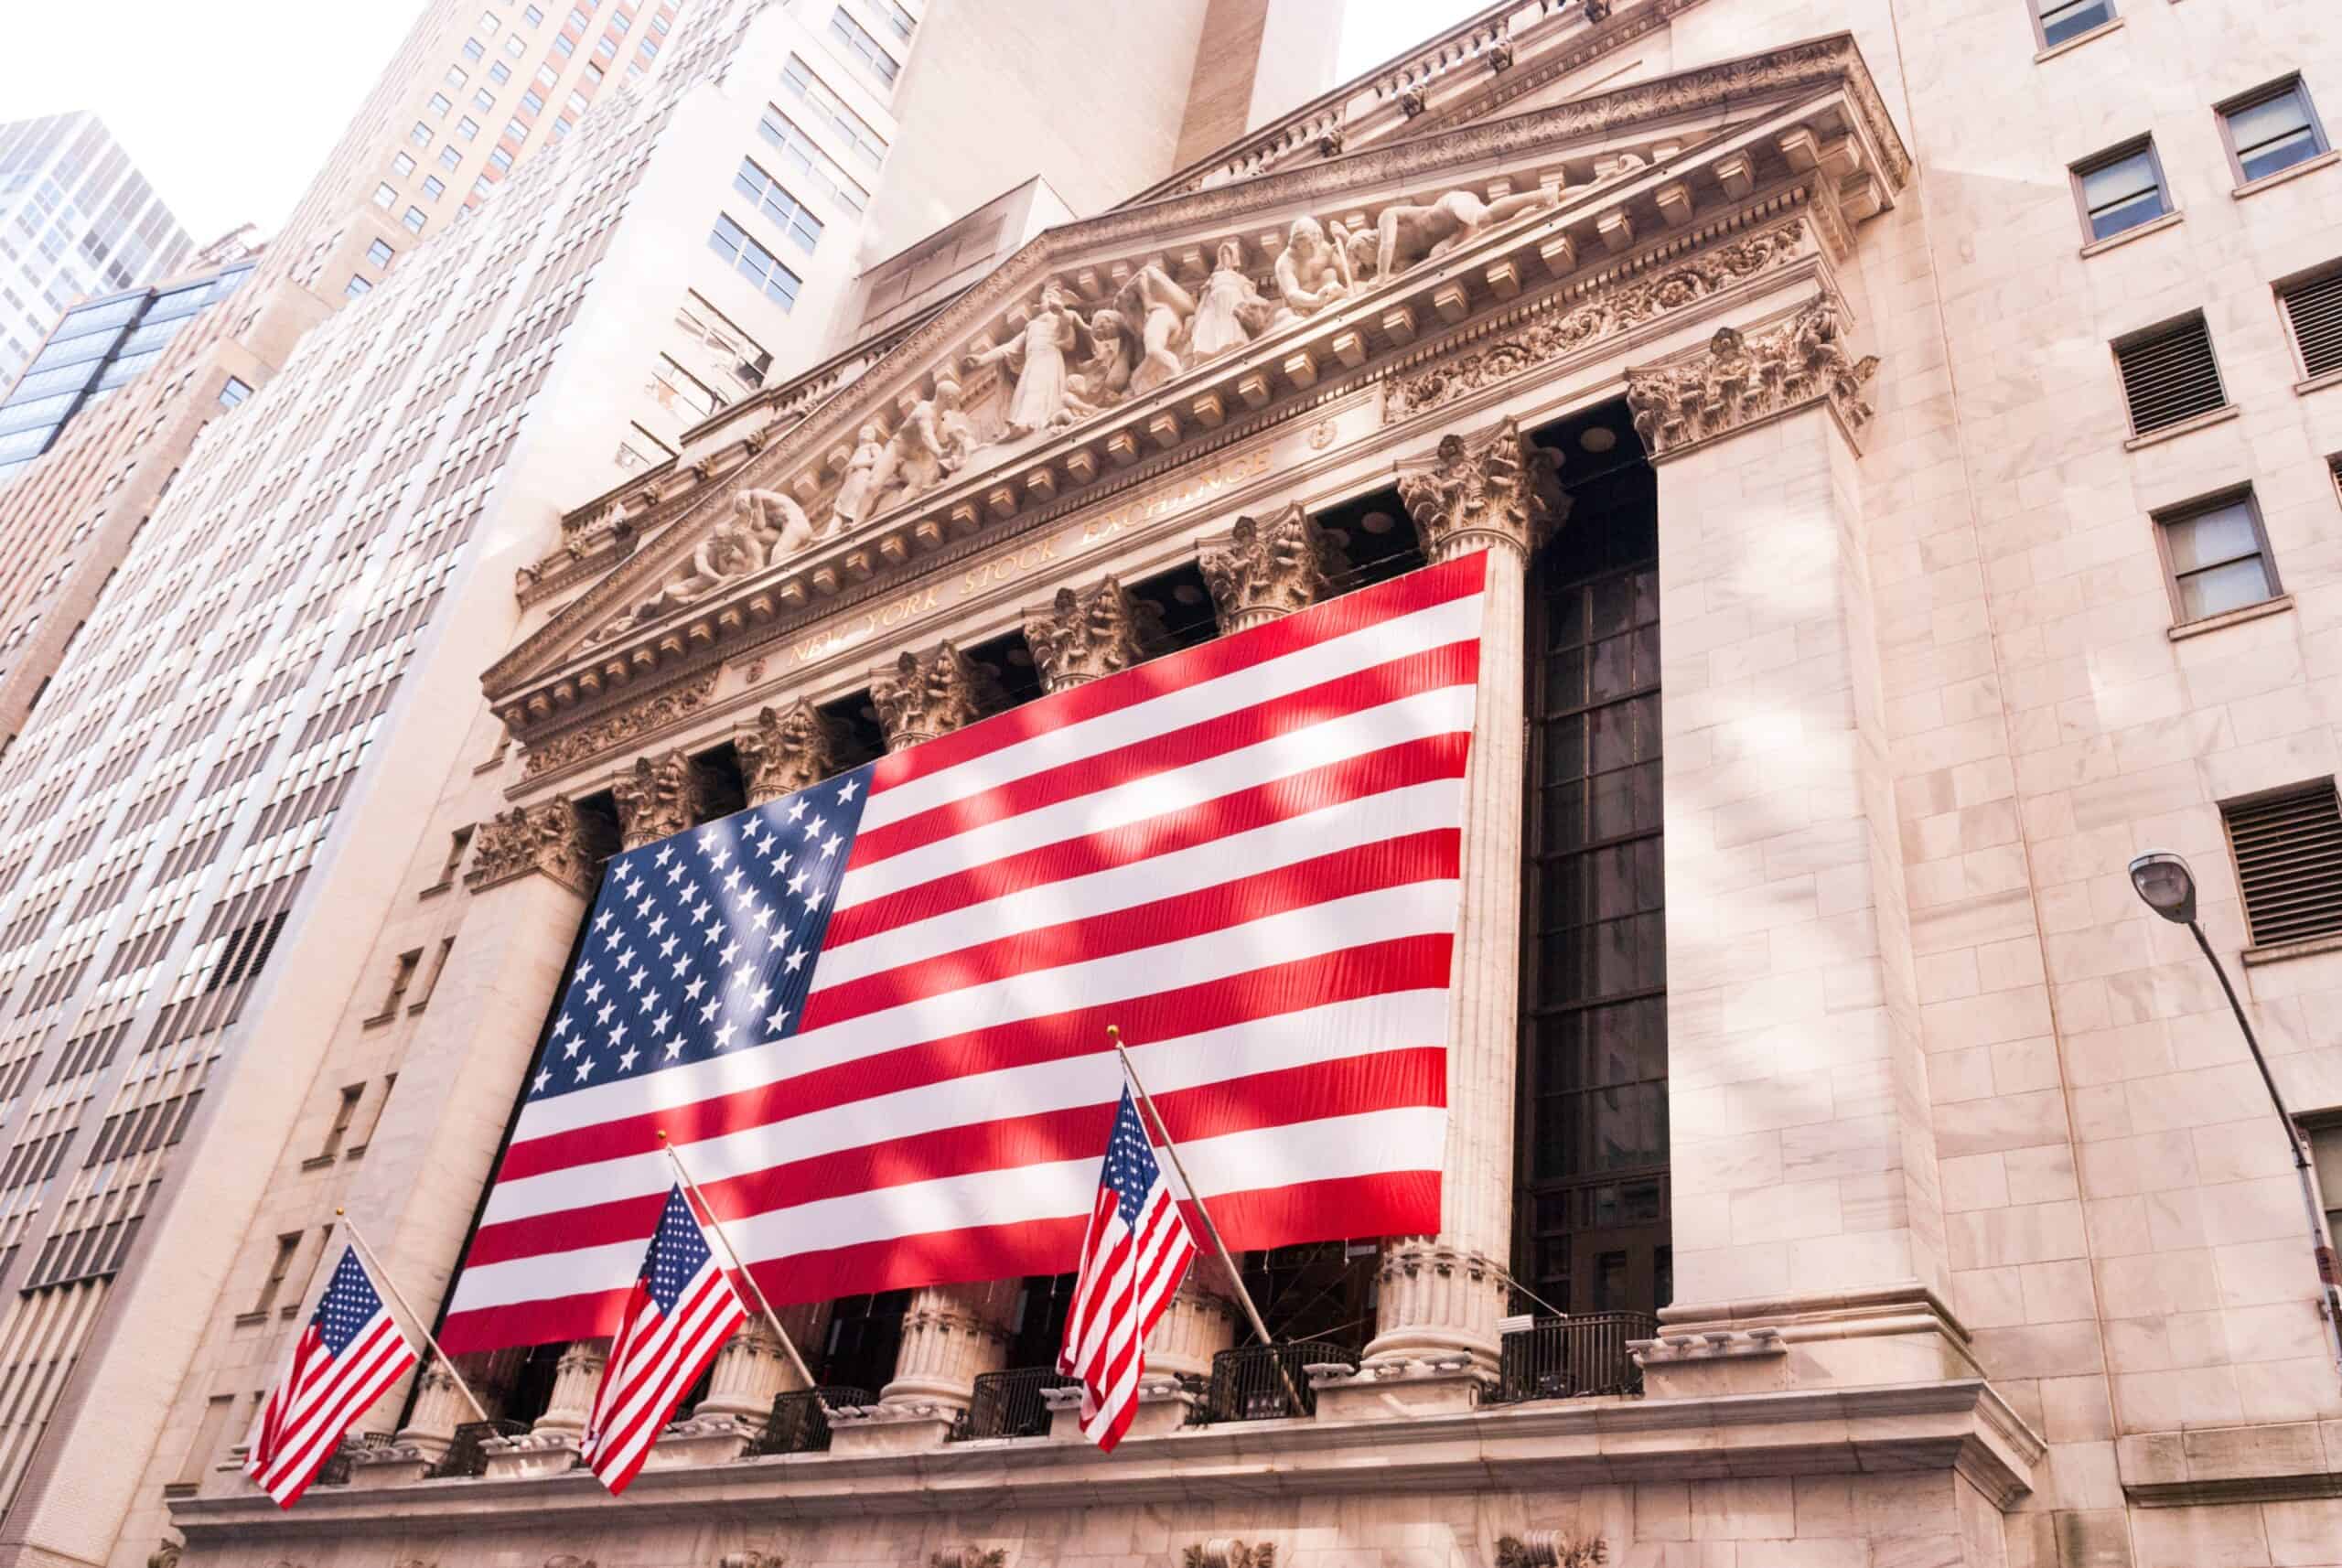 American flags draping the New York Stock Exchange building